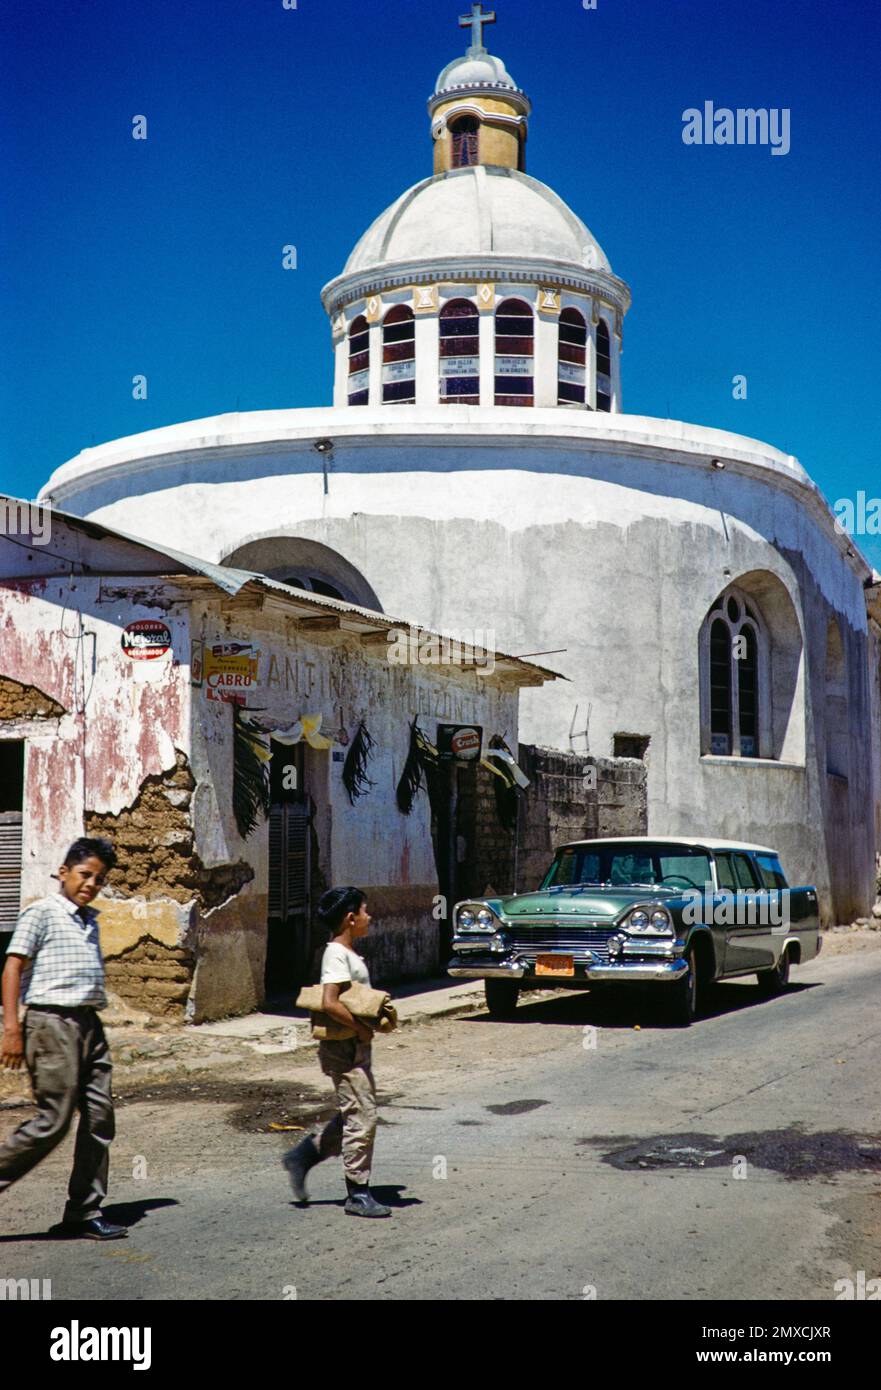 Village church after completion of top of dome,  Palin, Guatemala, Central America, c 1961 American 1958 Dodge Kingsway station wagon car Stock Photo